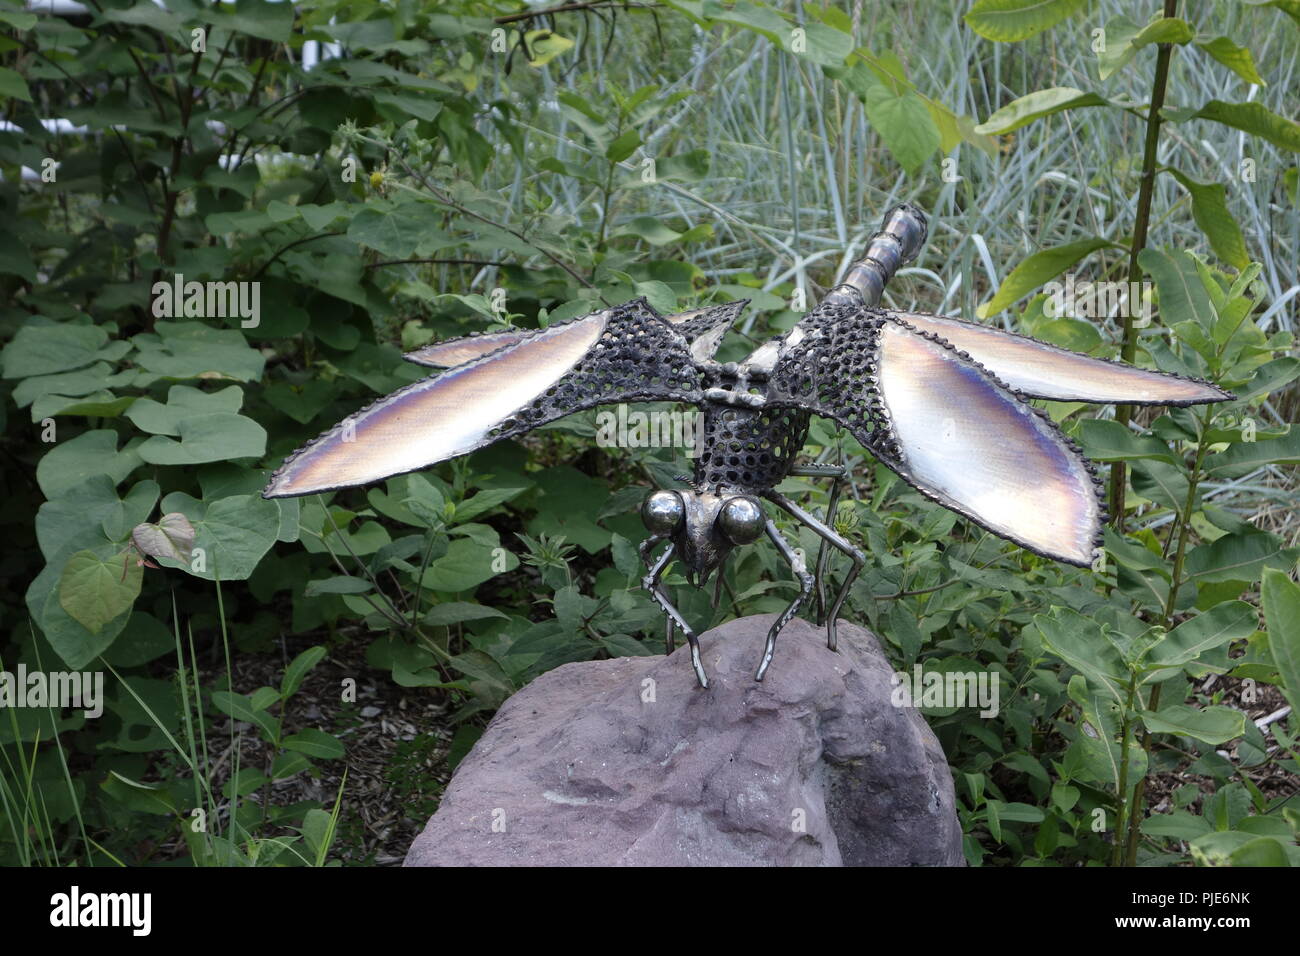 Dragonfly Metal Sculpture Durham life and science museum Stock Photo